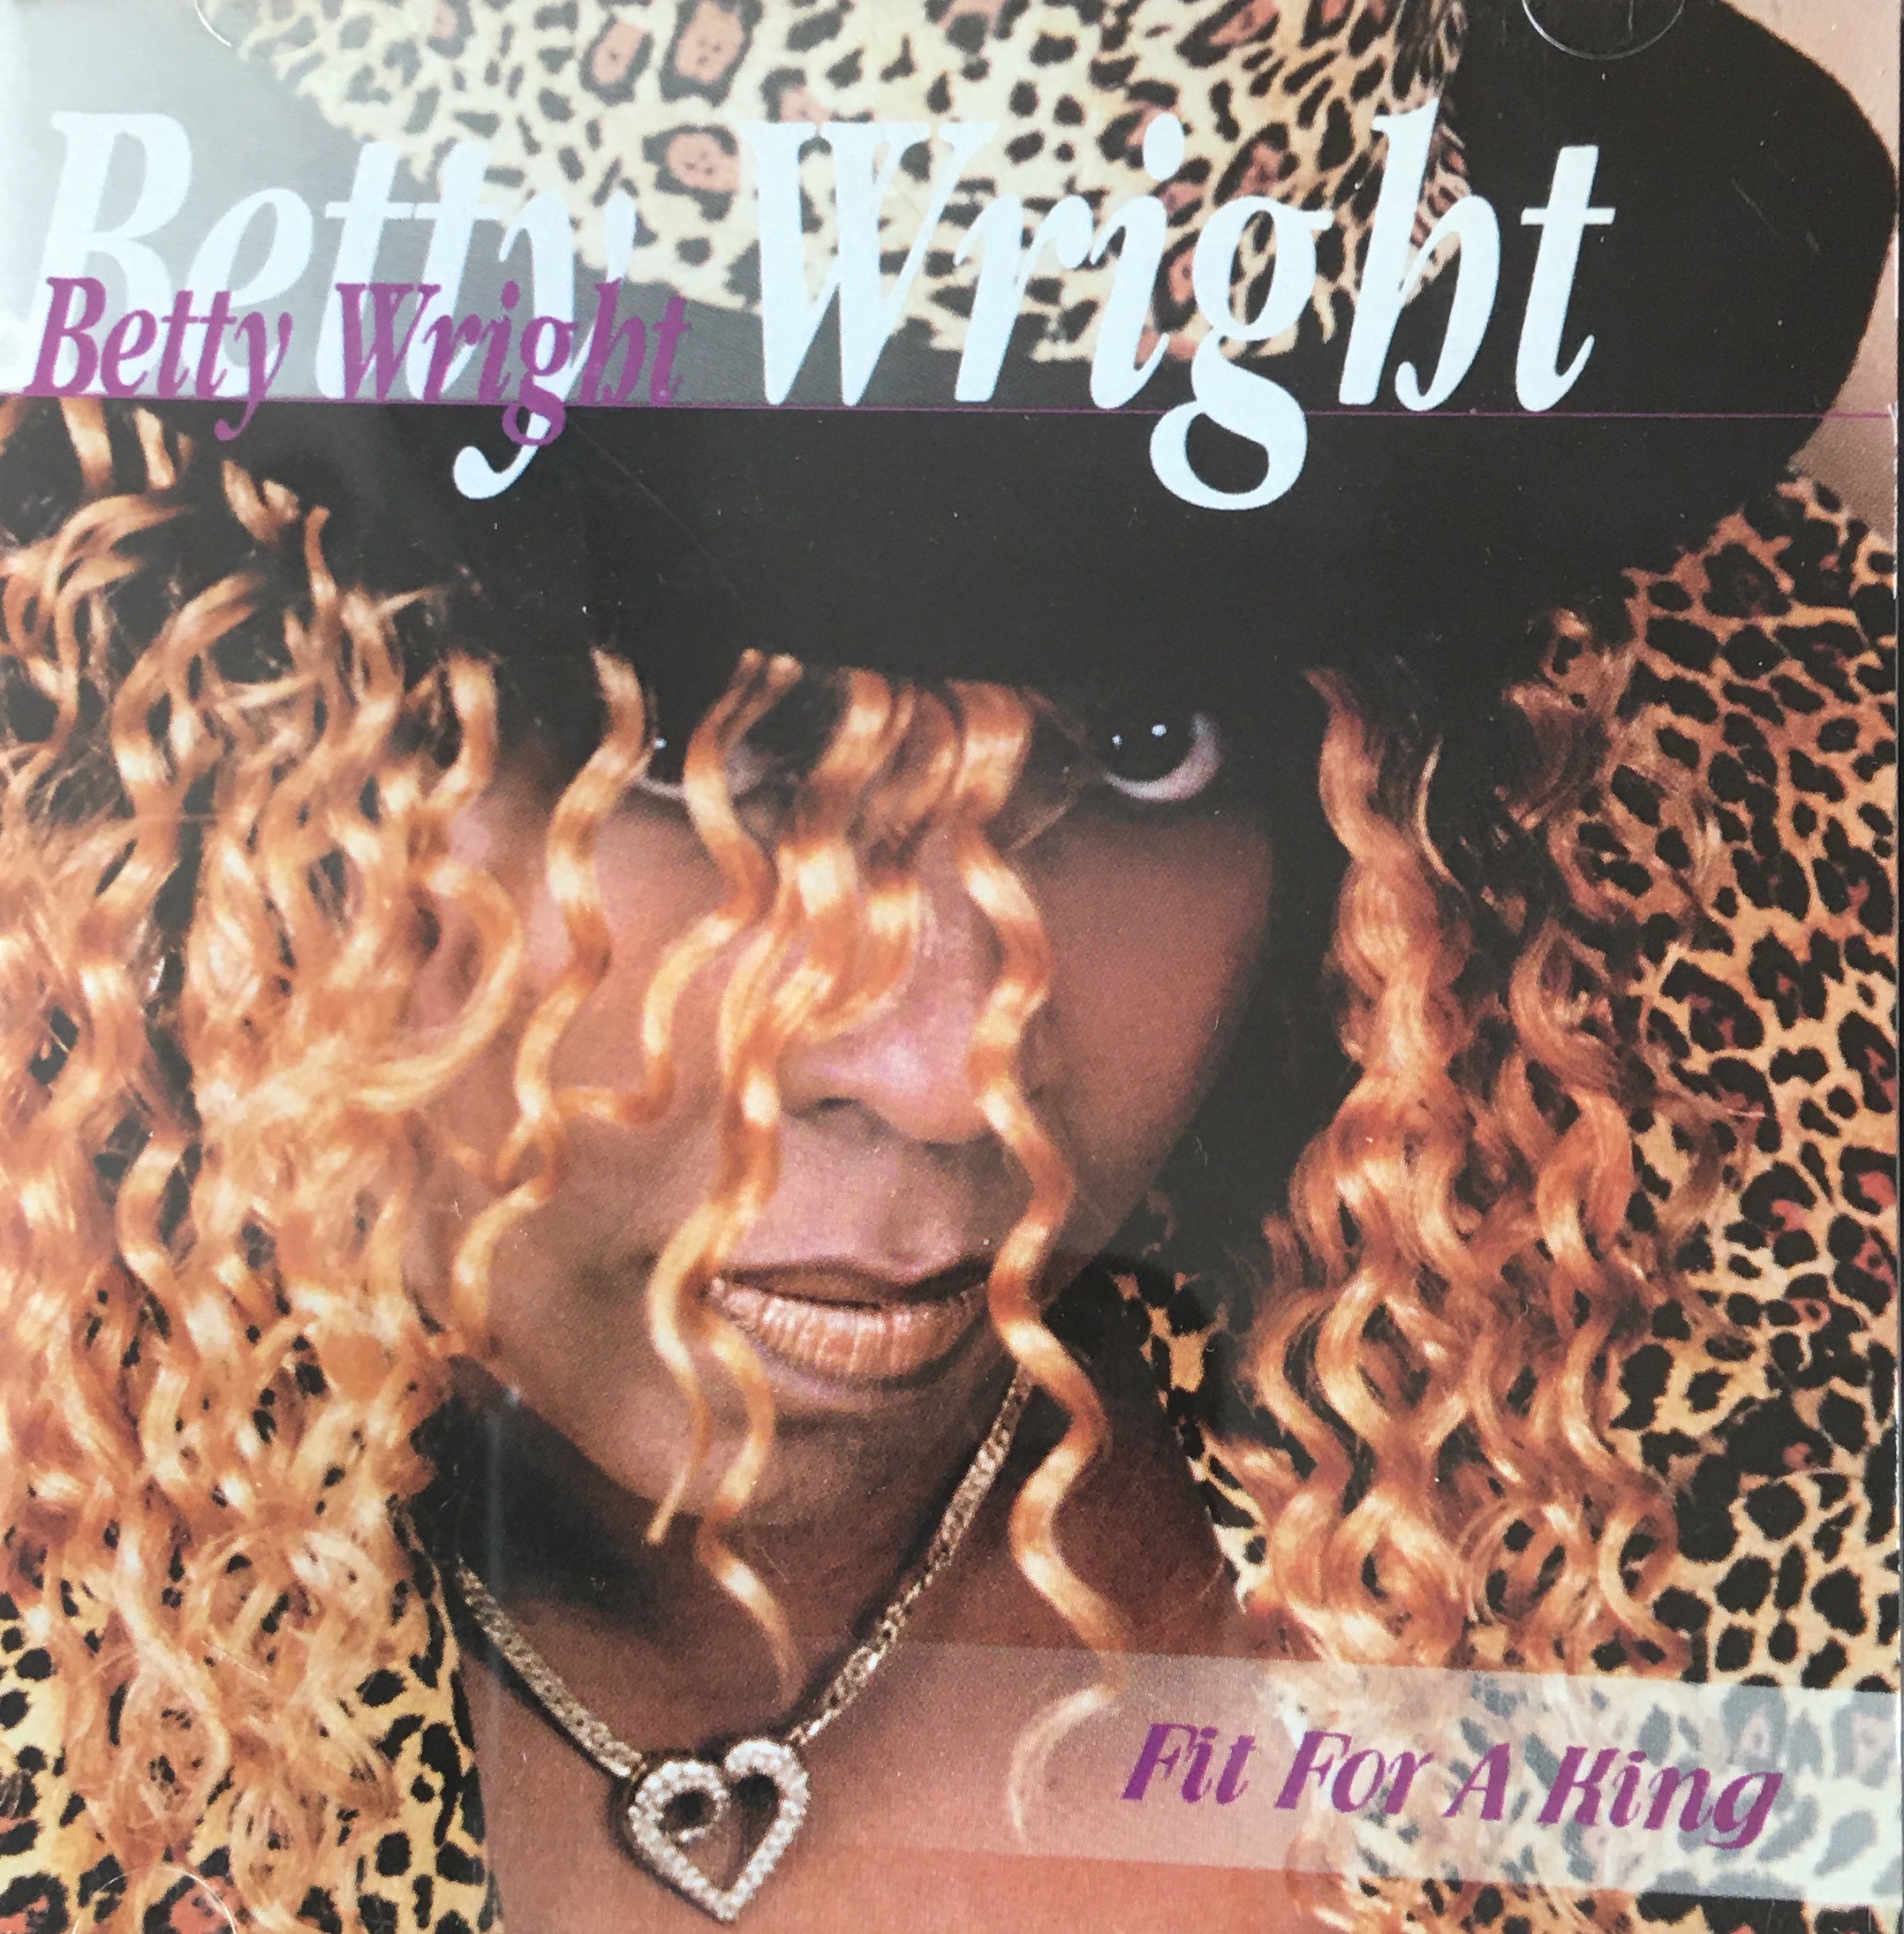 Betty Wright, Fit For A King (Soul ) - LonDisc Records.